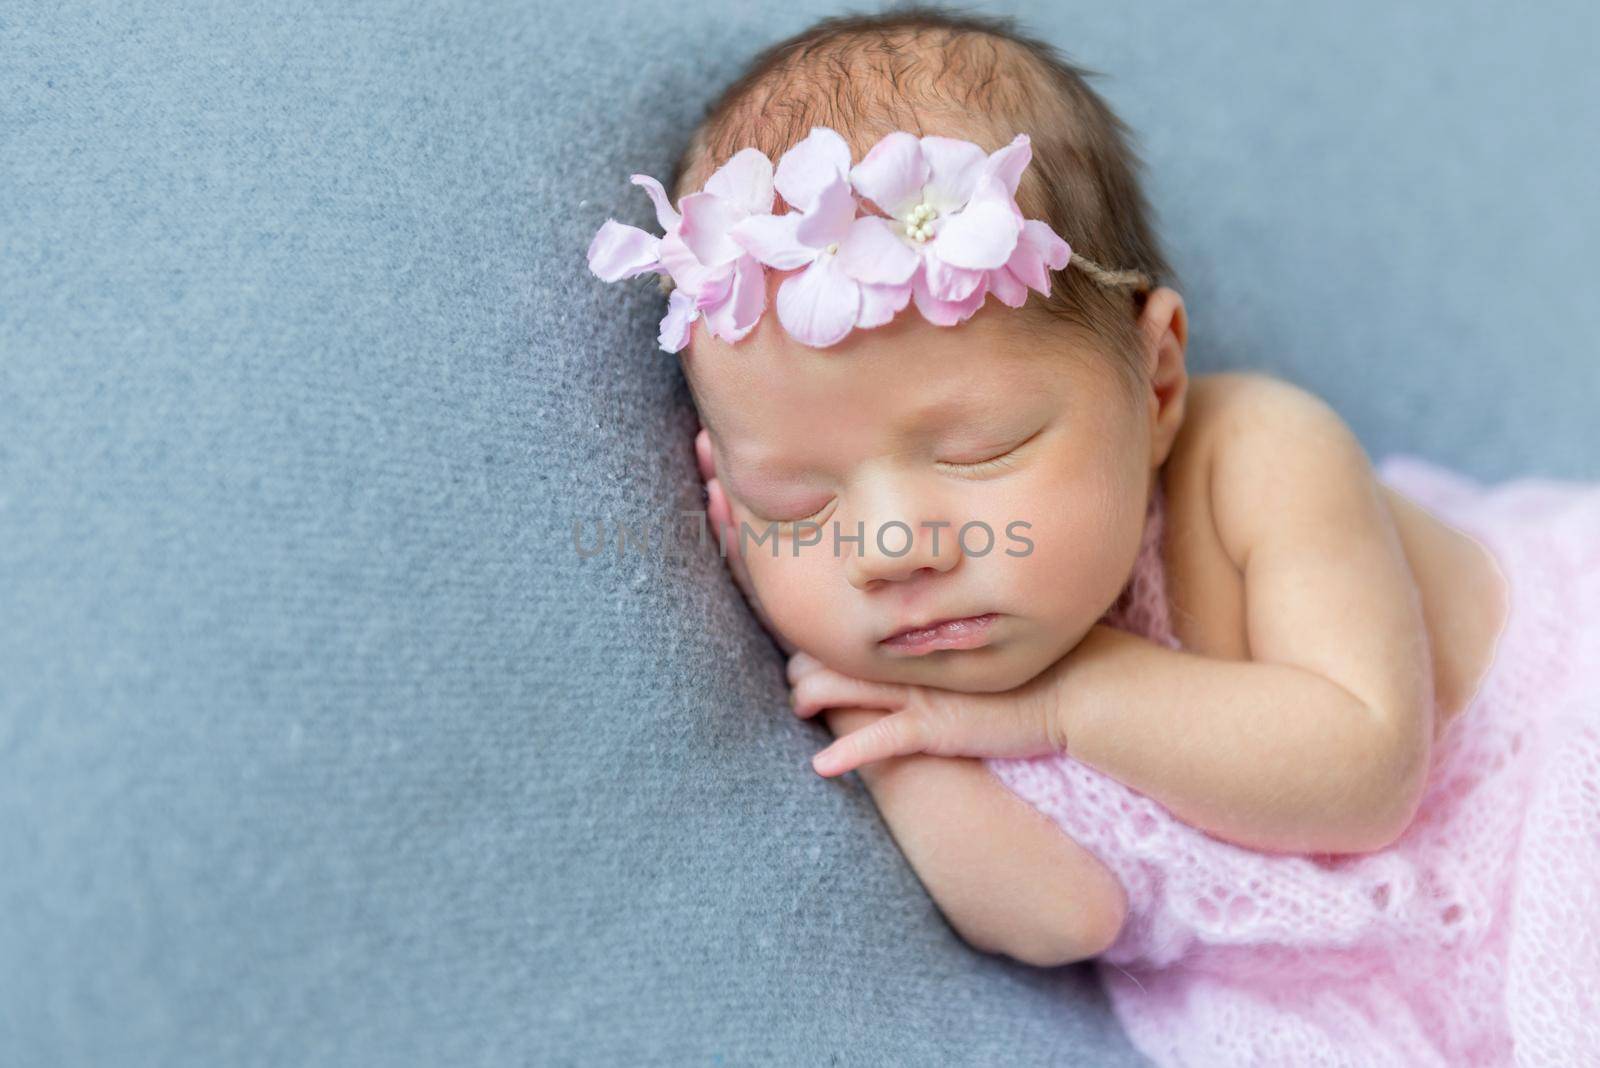 Adorable little girl napping on her side, dressed in a sweet pink dress, closeup